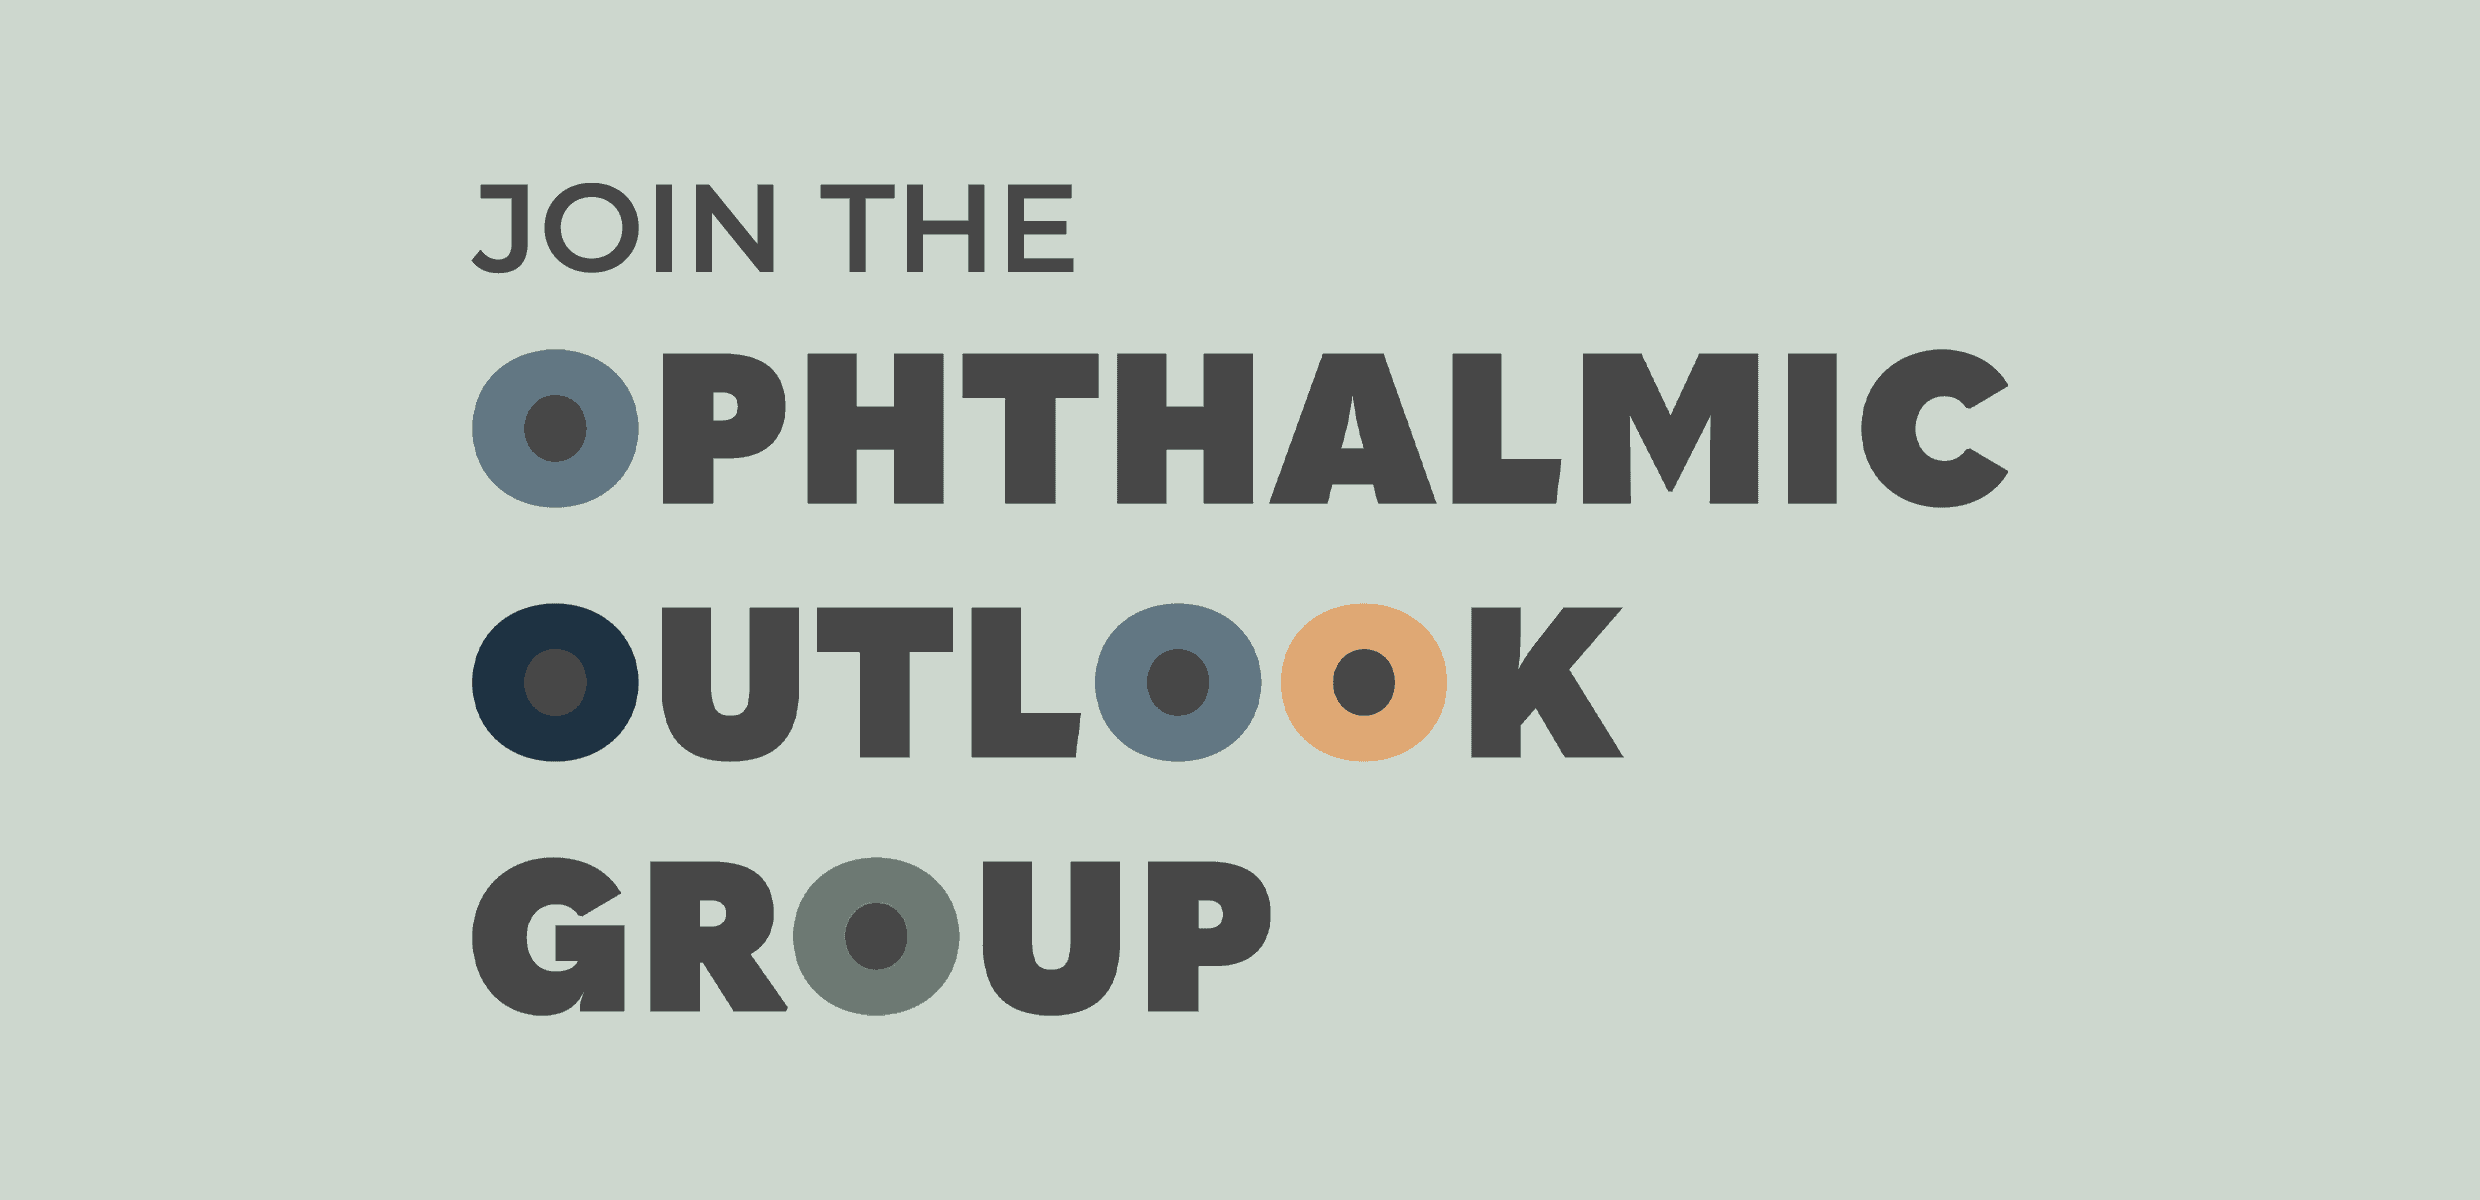 Join the Ophthalmic Outlook Group: Educate, Engage, and Enhance Your Ophthalmic Knowledge